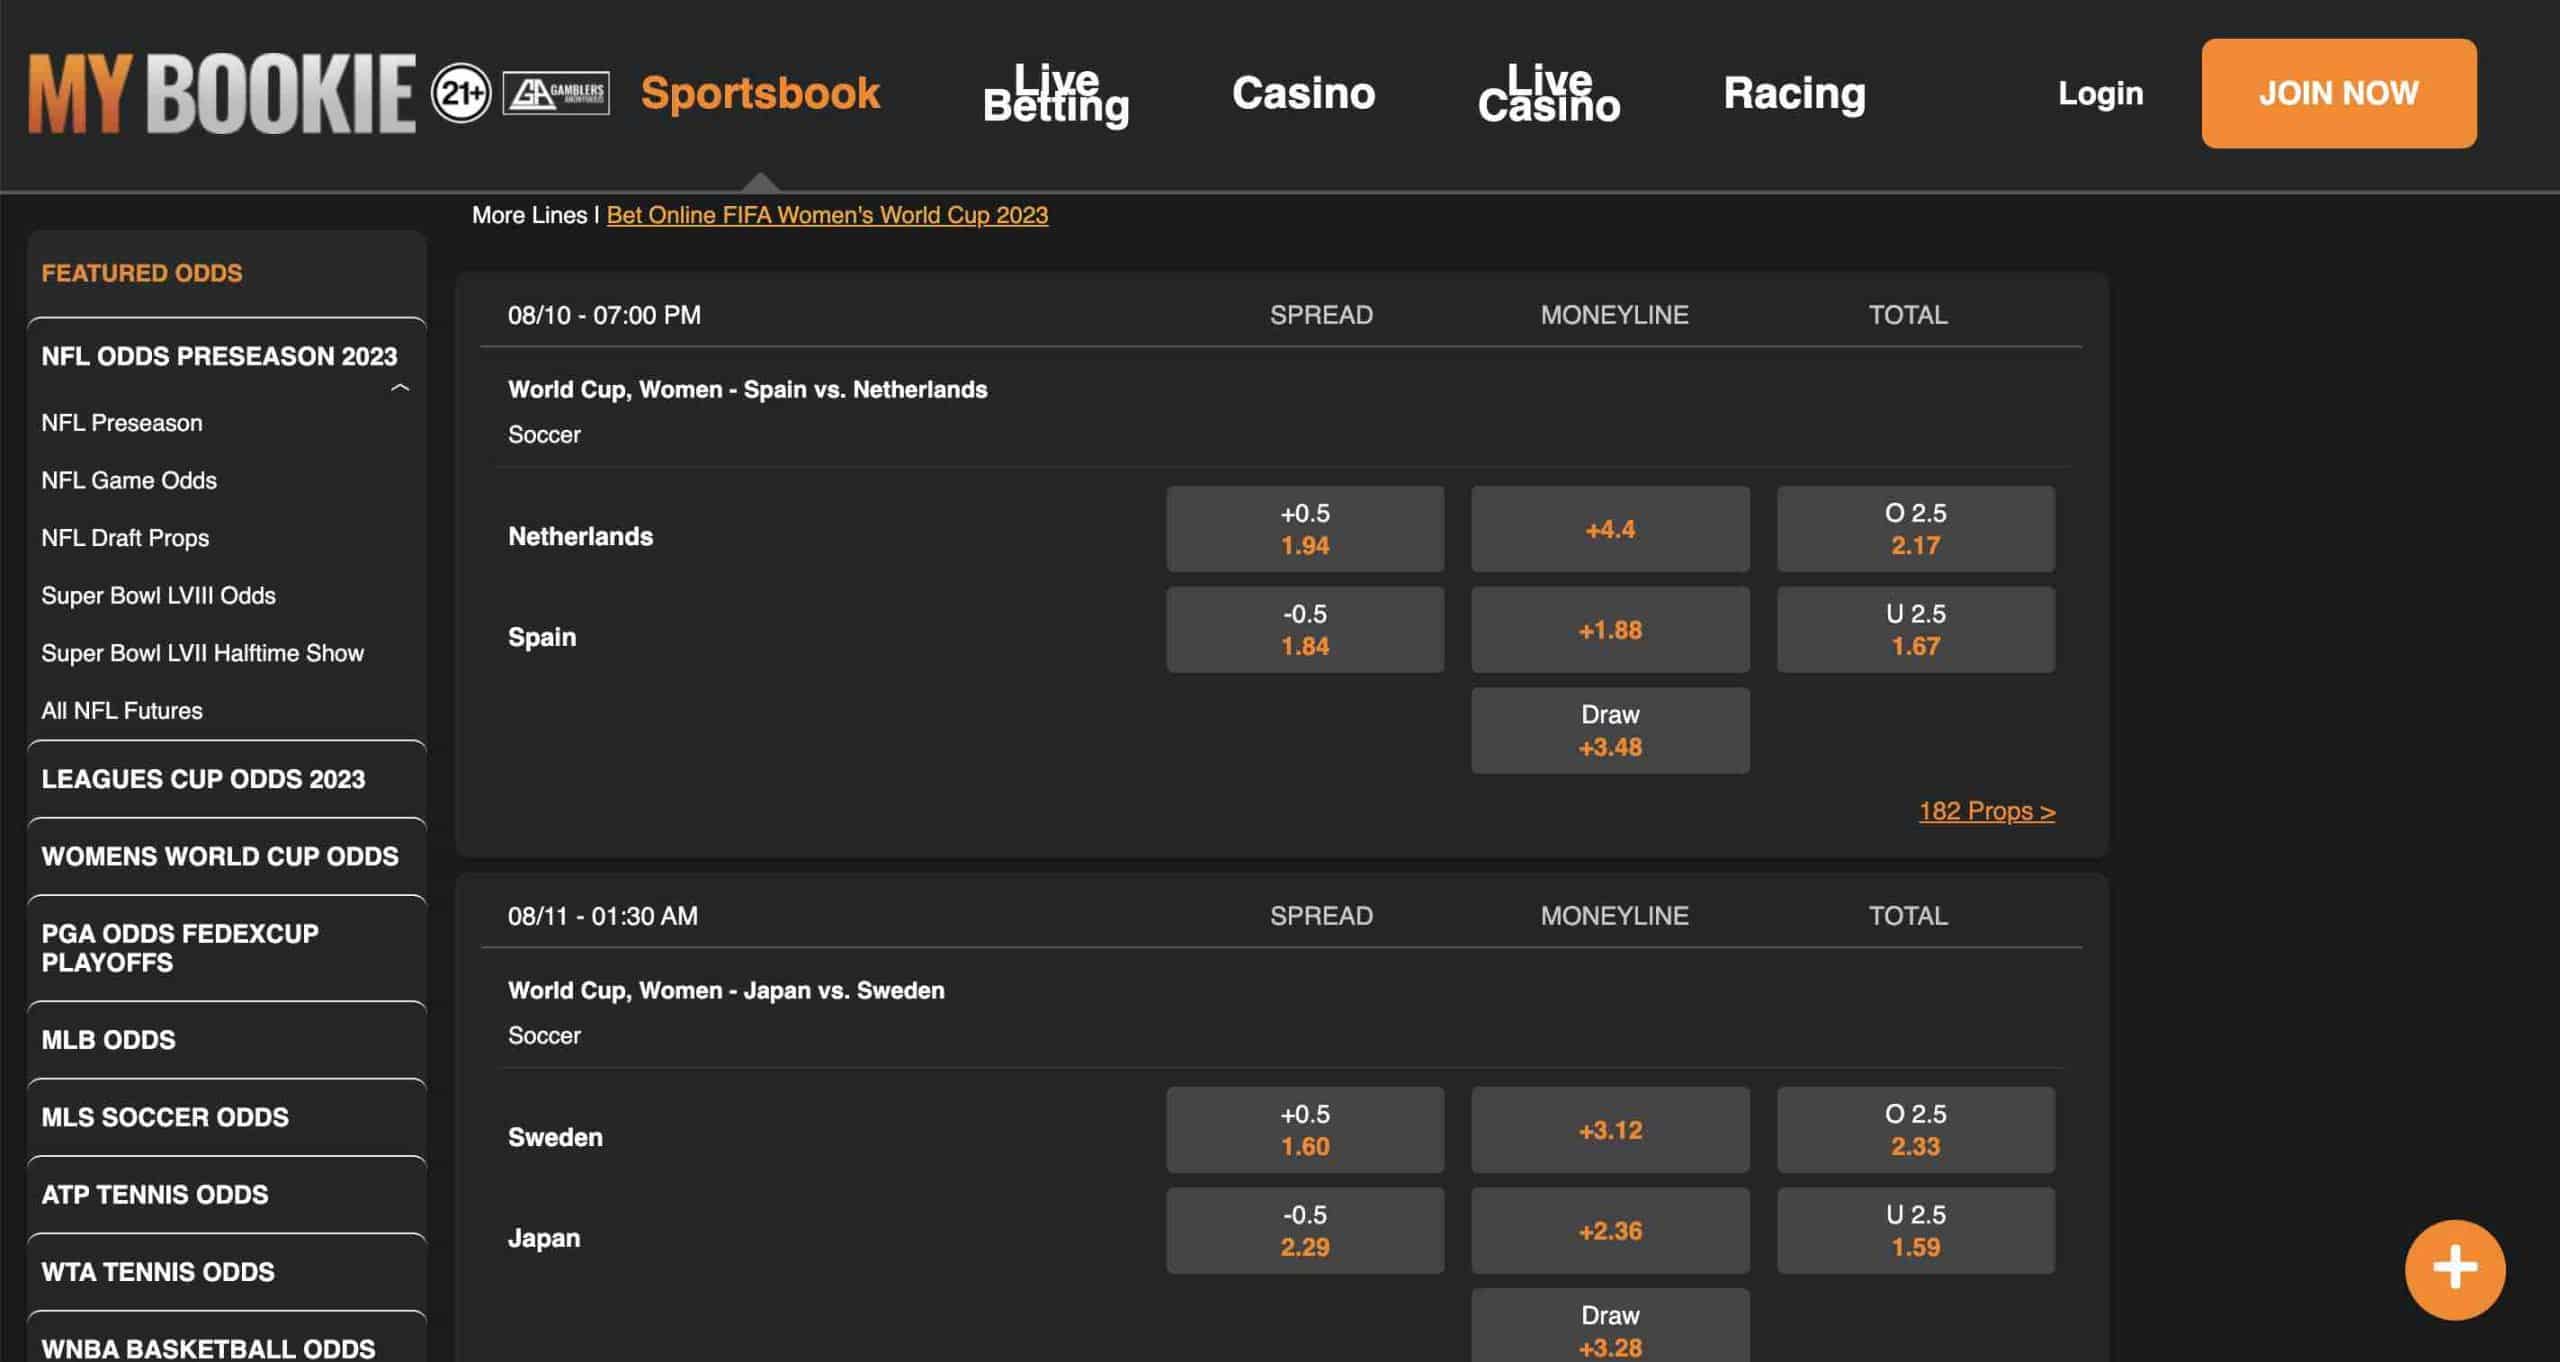 A screenshot of the odds for the main markets on two Women's World Cup matches in the Decimal format